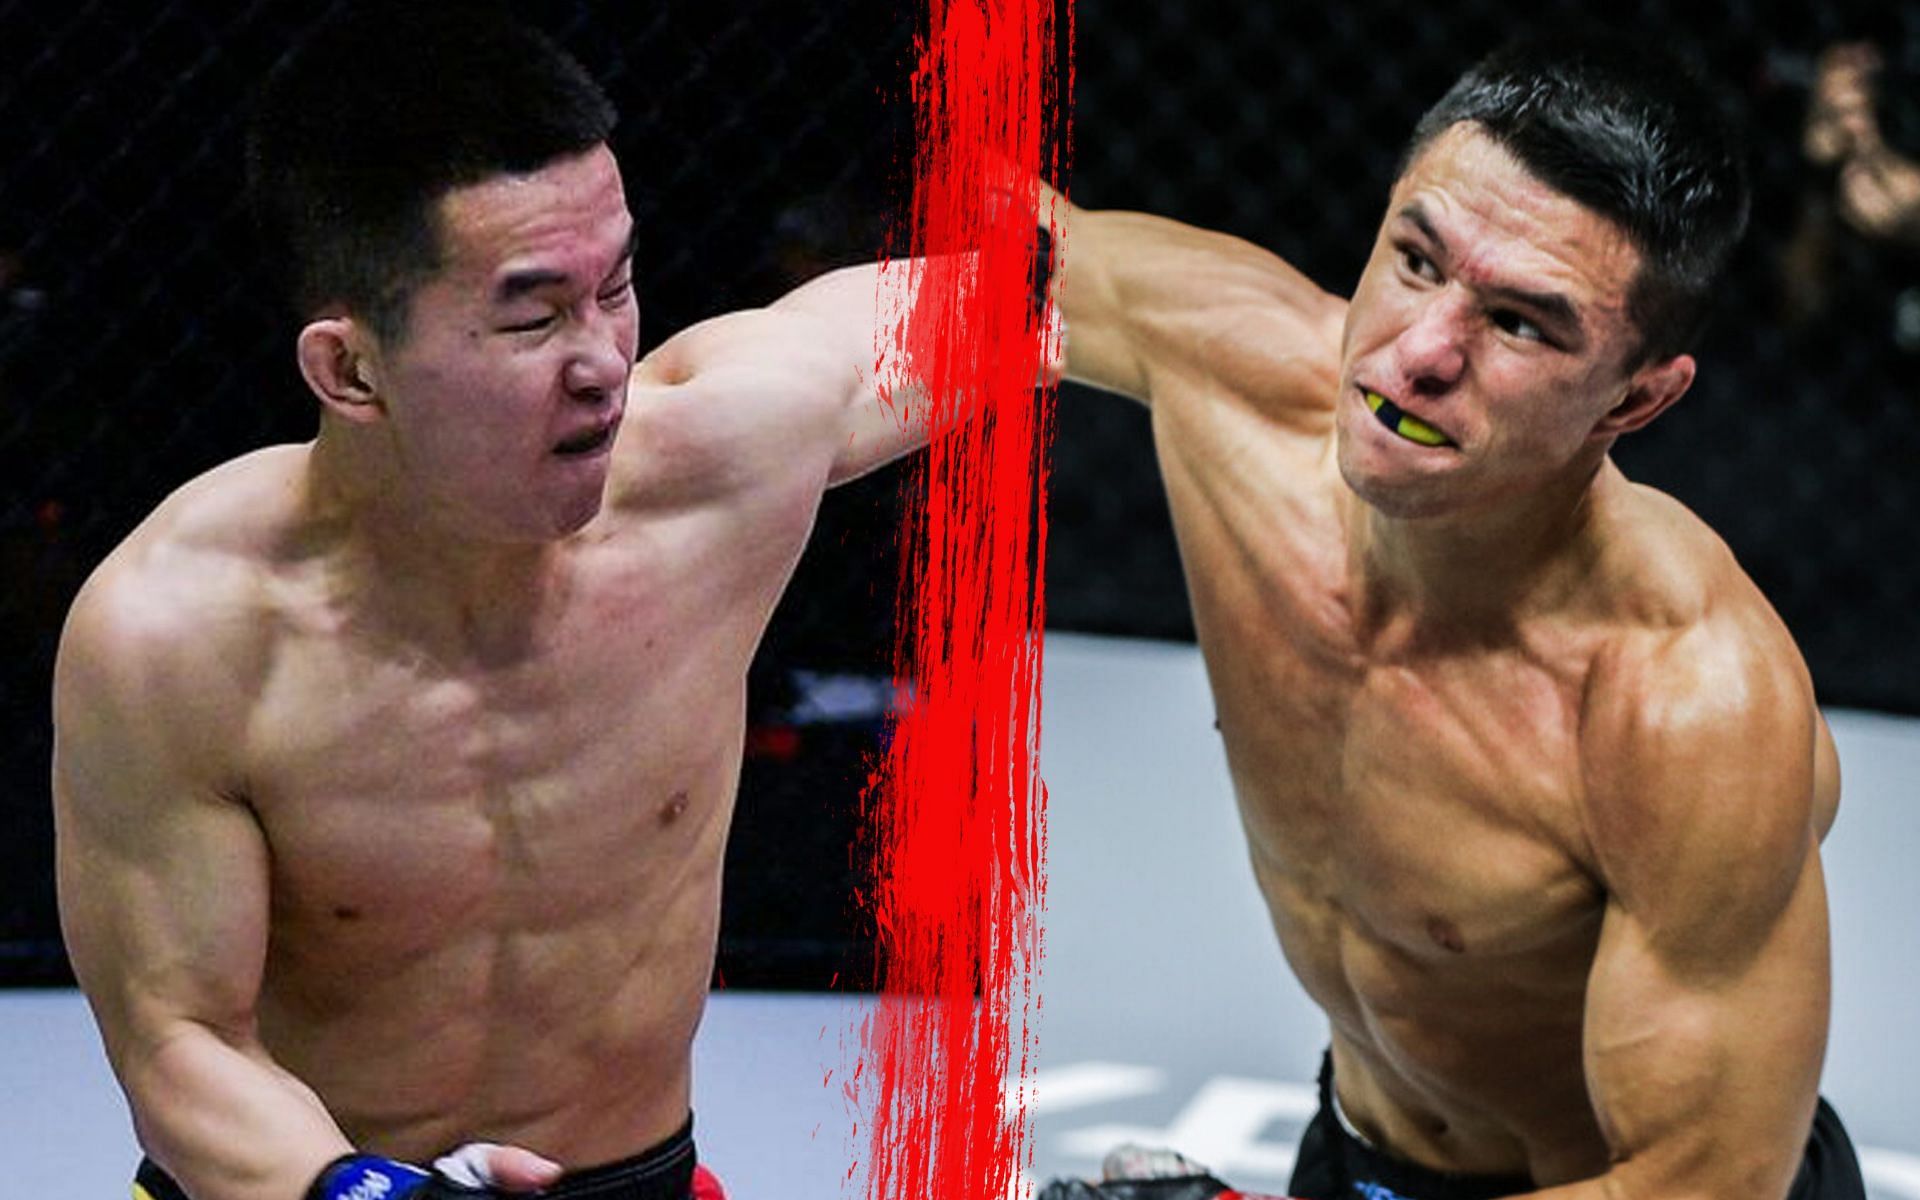 Reece McLaren (R) believes his matchup with Xie Wei (L) will produce a US$ 50,000 bonus. | [Photos: ONE Championship]